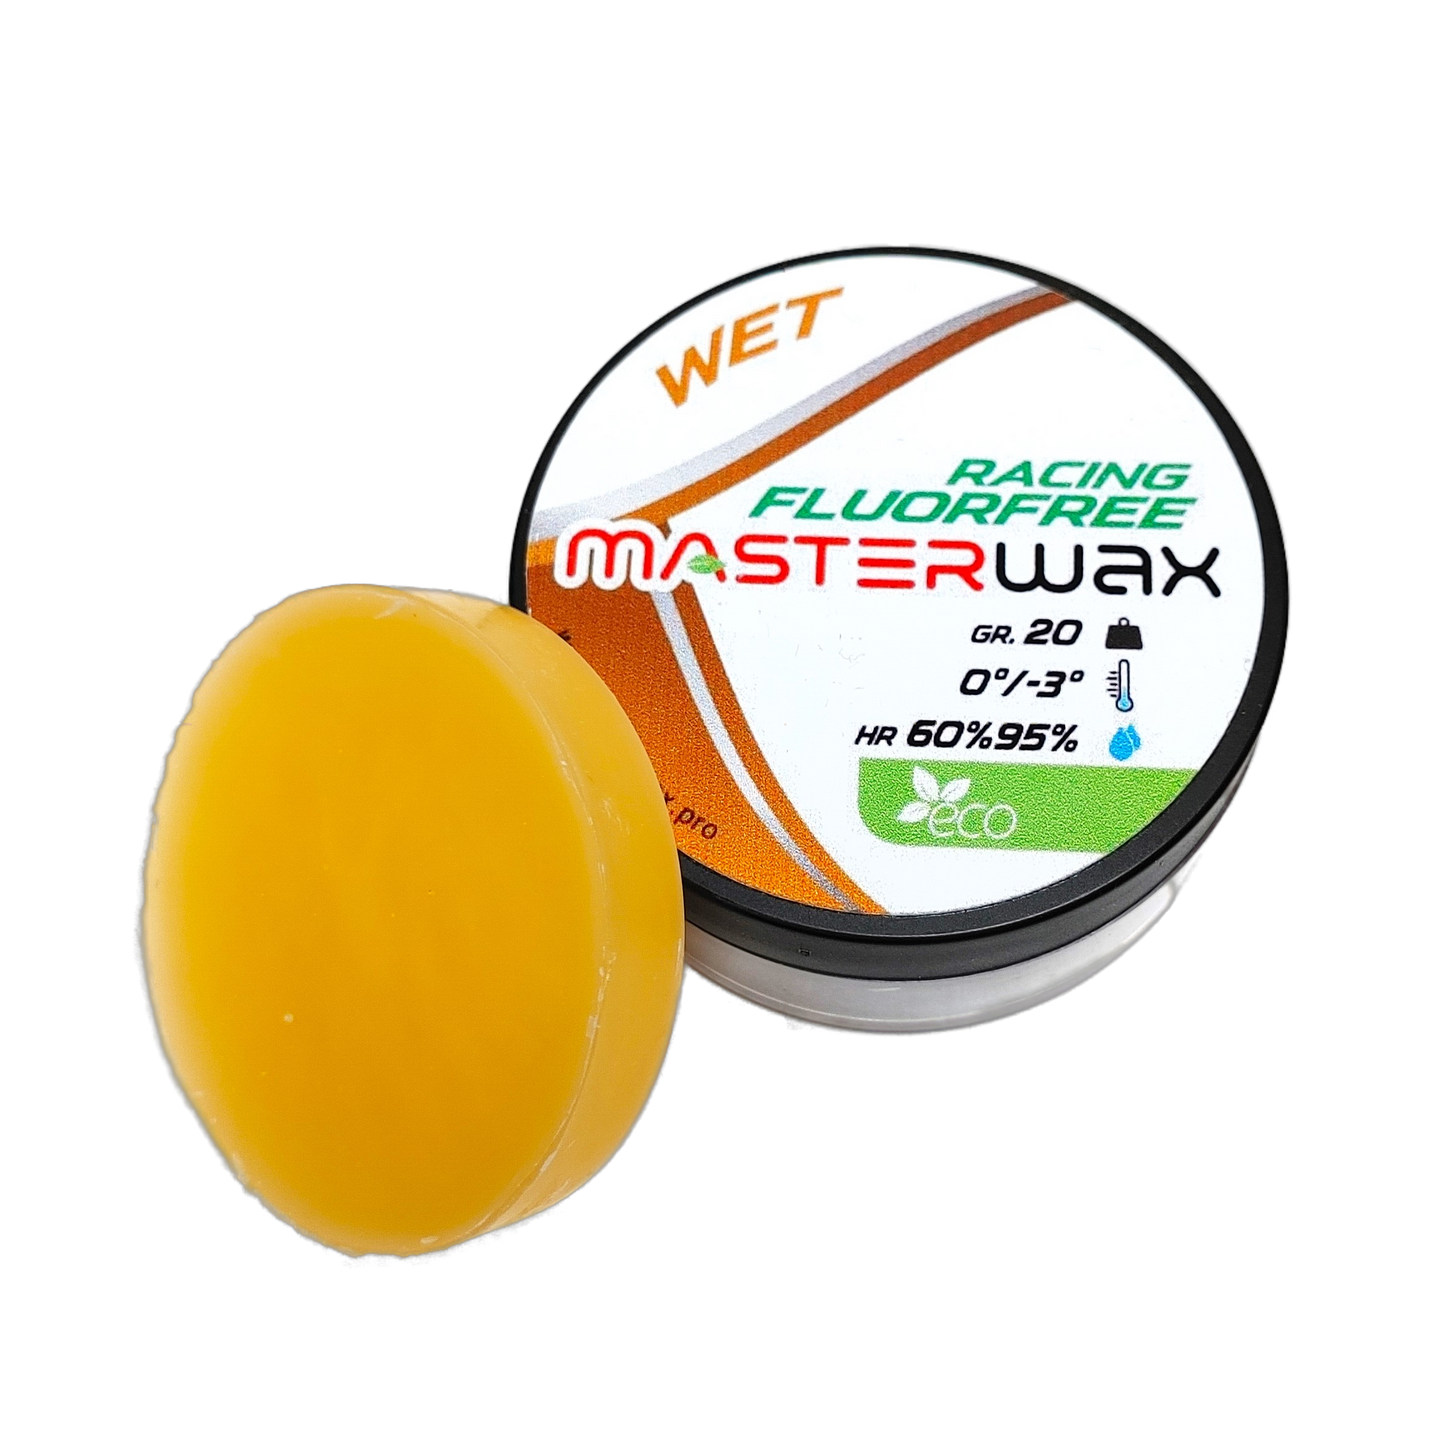 A product picture of the MasterWax RACING FLUORFREE Wet